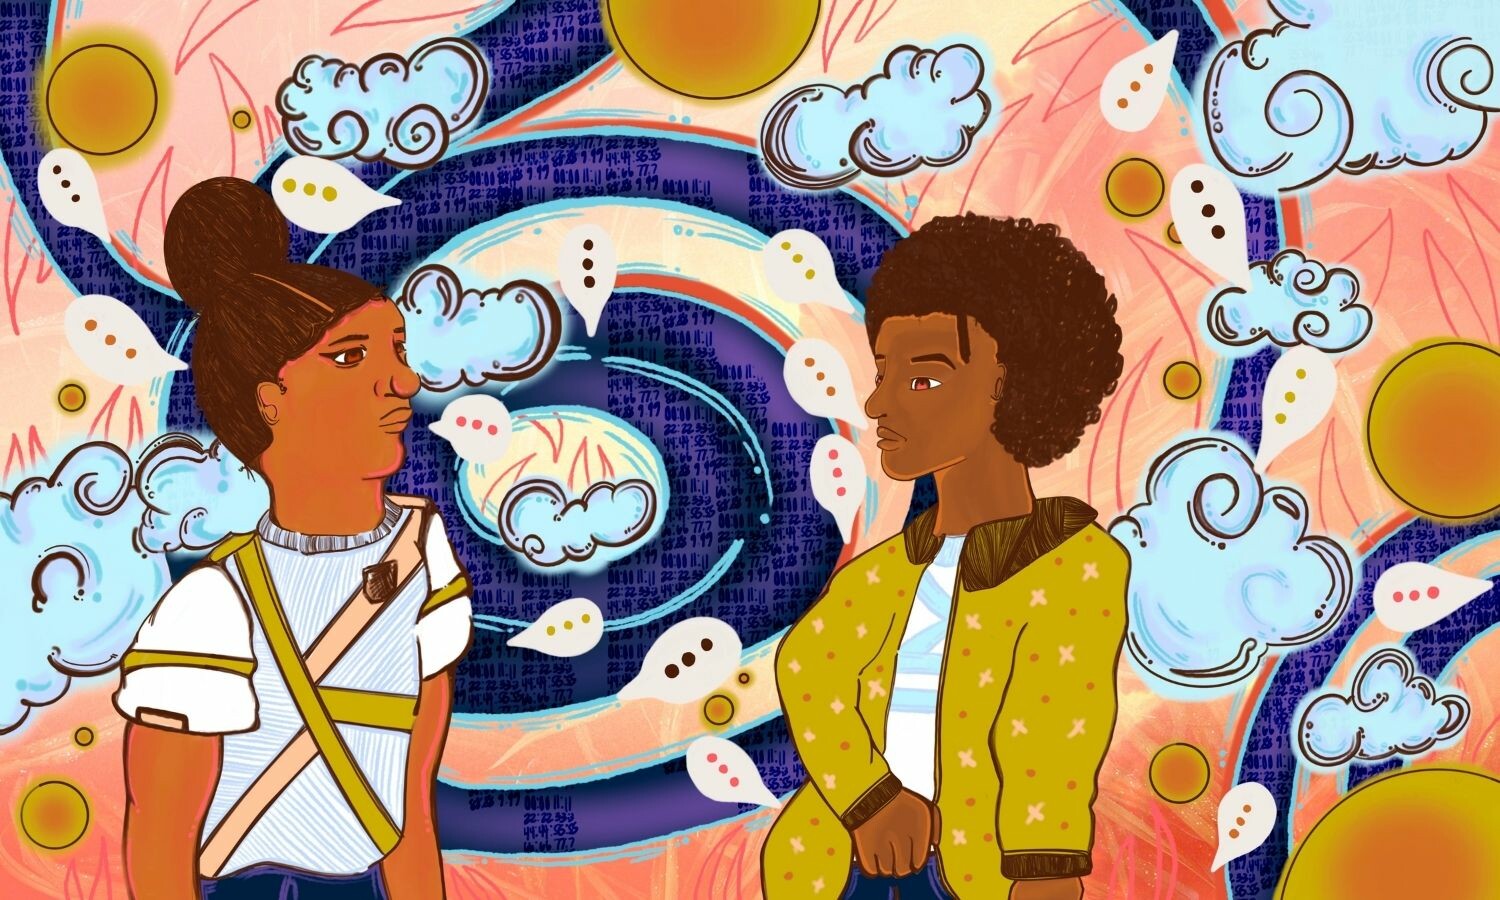 An illustration of two Black people with different hairstyles and outfits, surrounded by clouds and suns, against an orange and blue background.